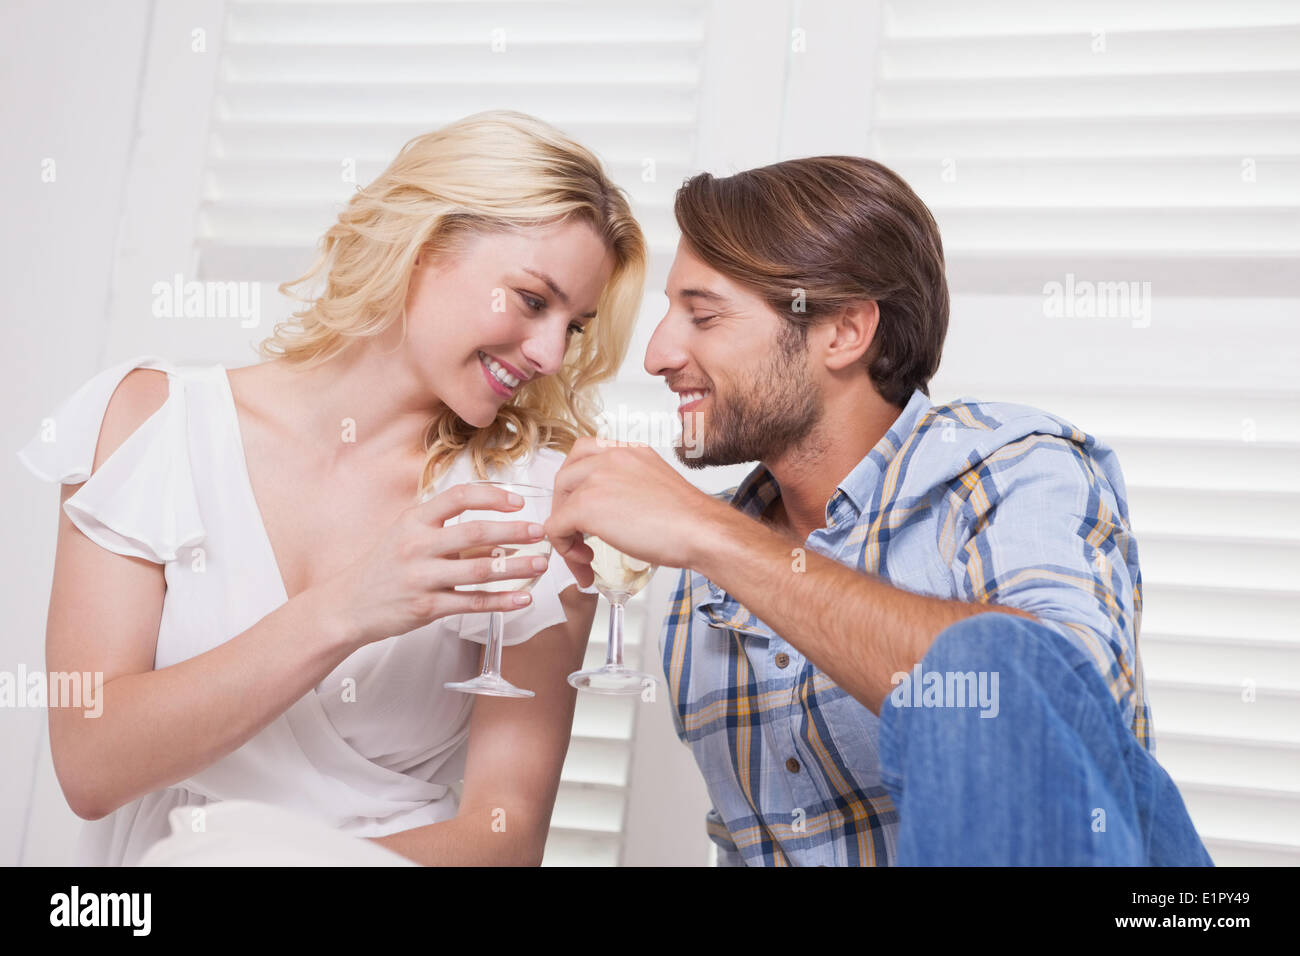 Young couple sitting on floor drinking wine Stock Photo